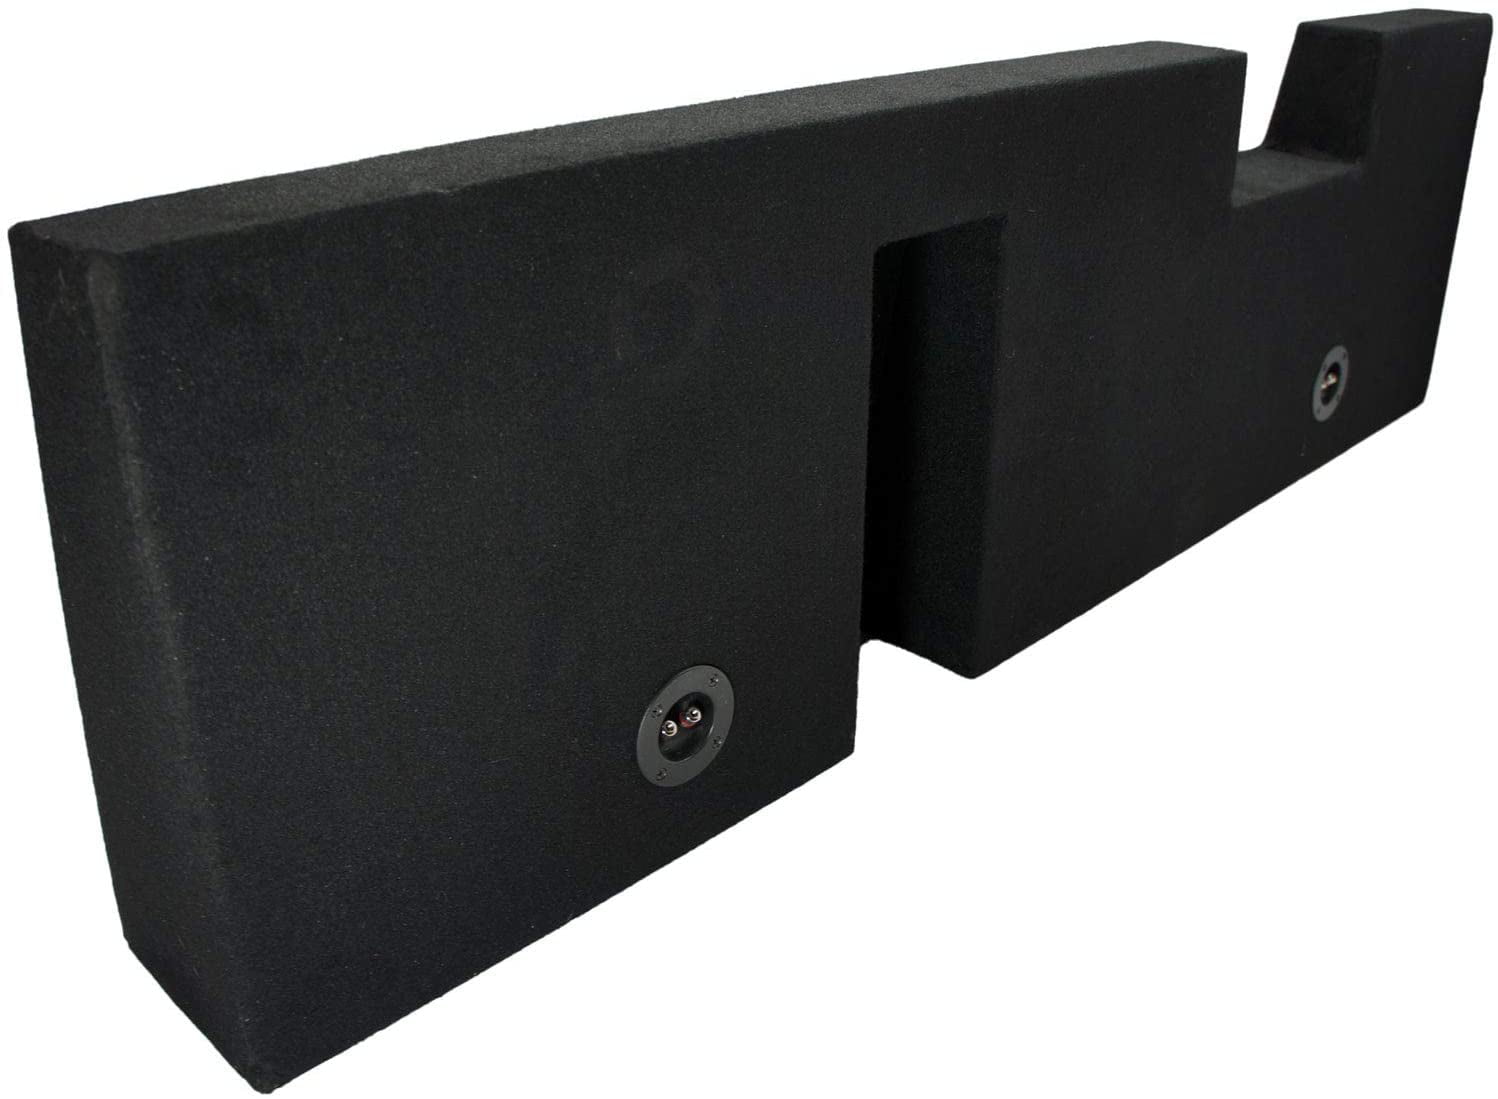 PORTED VENTED Subwoofer Sub Box for 2010 Ford F150 Supercrew Crew Cab  2-12" 